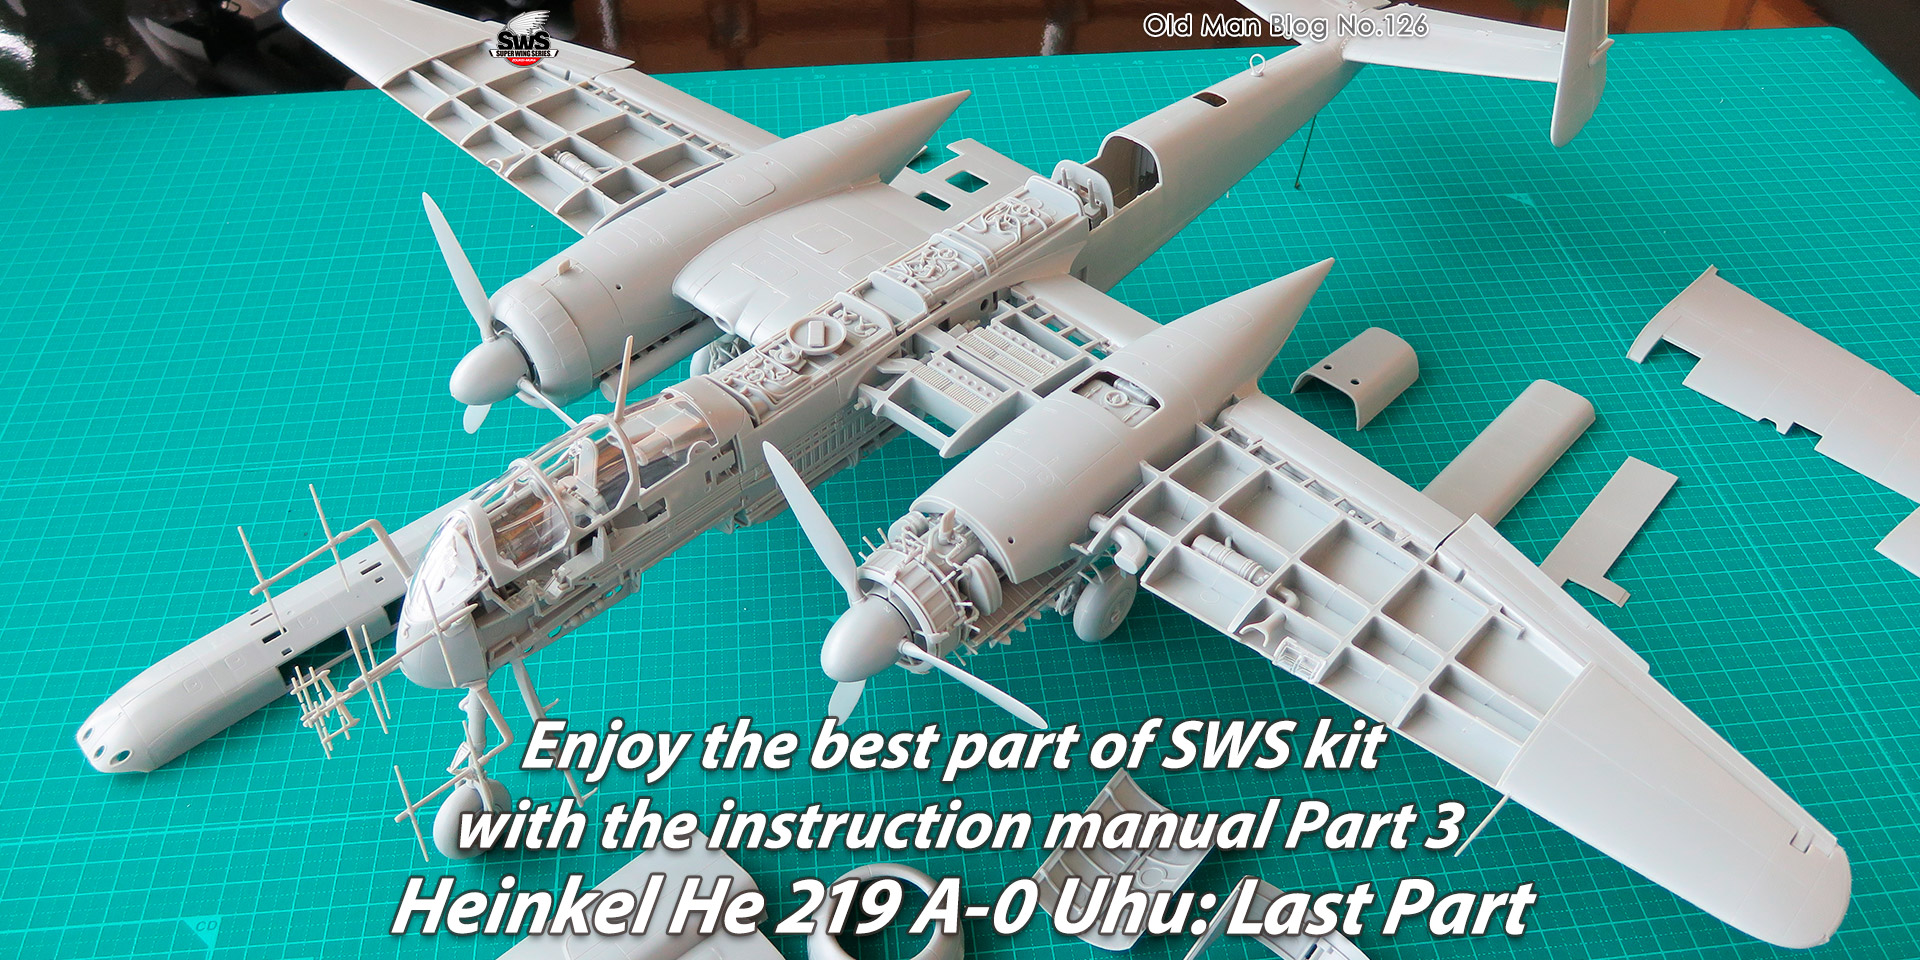 Enjoy the best part of SWS kit with the instruction manual Part 3: Heinkel He 219 A-0 Uhu: Last Part